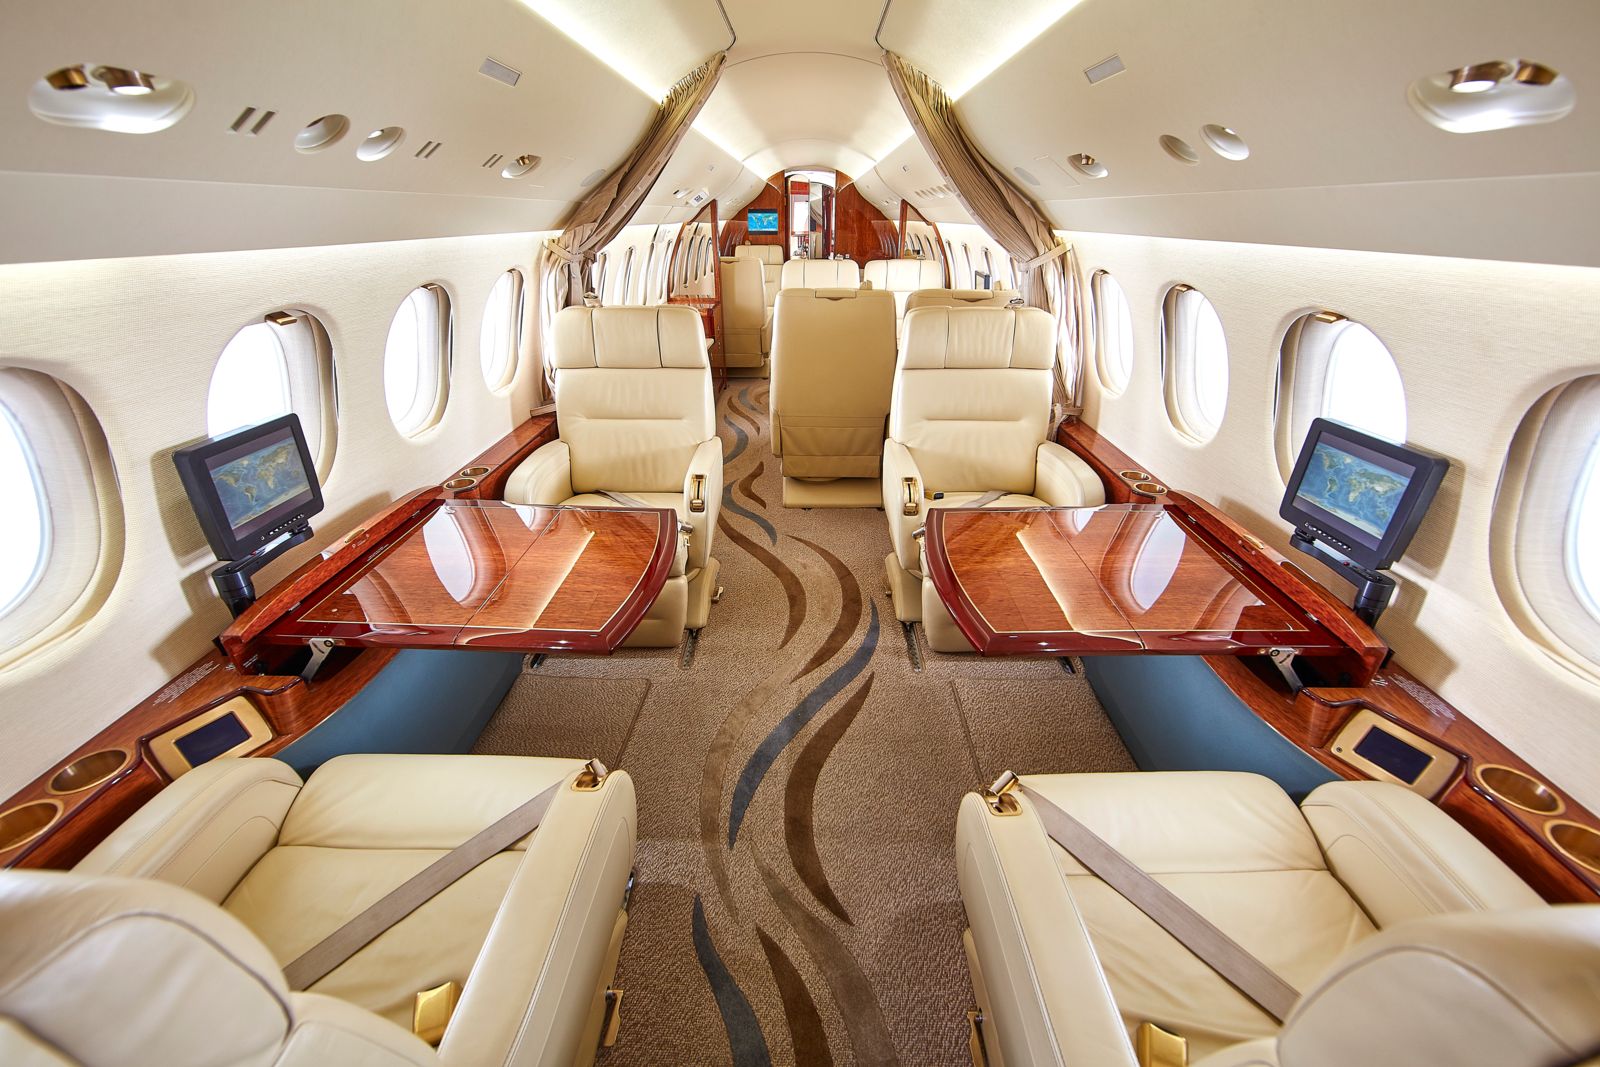 Dassault Falcon 7X  S/N 58 for sale | gallery image: /userfiles/images/F7X_sn58/ca_5937_gj_int_ca3_0037.jpg